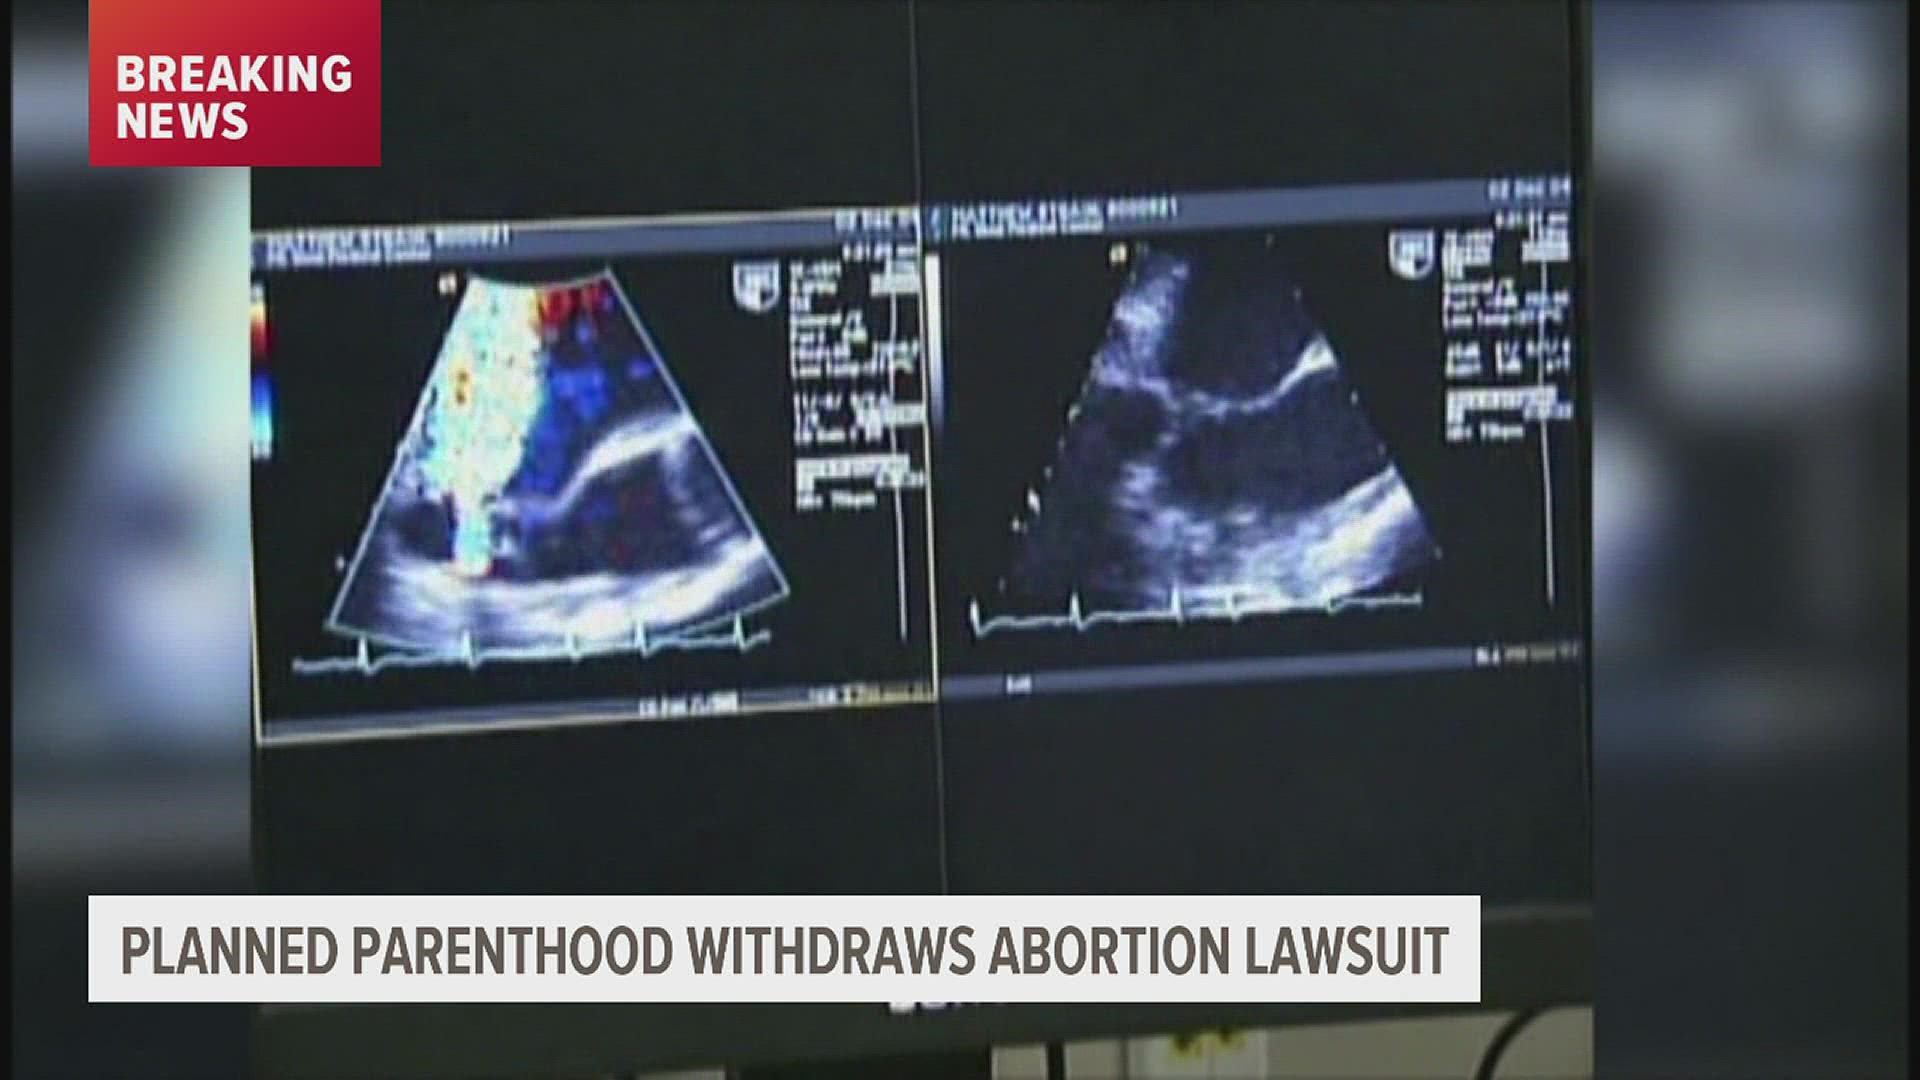 Abortion remains legal in Iowa for now, but Gov. Kim Reynolds said she will ask the courts to revive a six-week abortion ban law that another judge blocked in 2019.